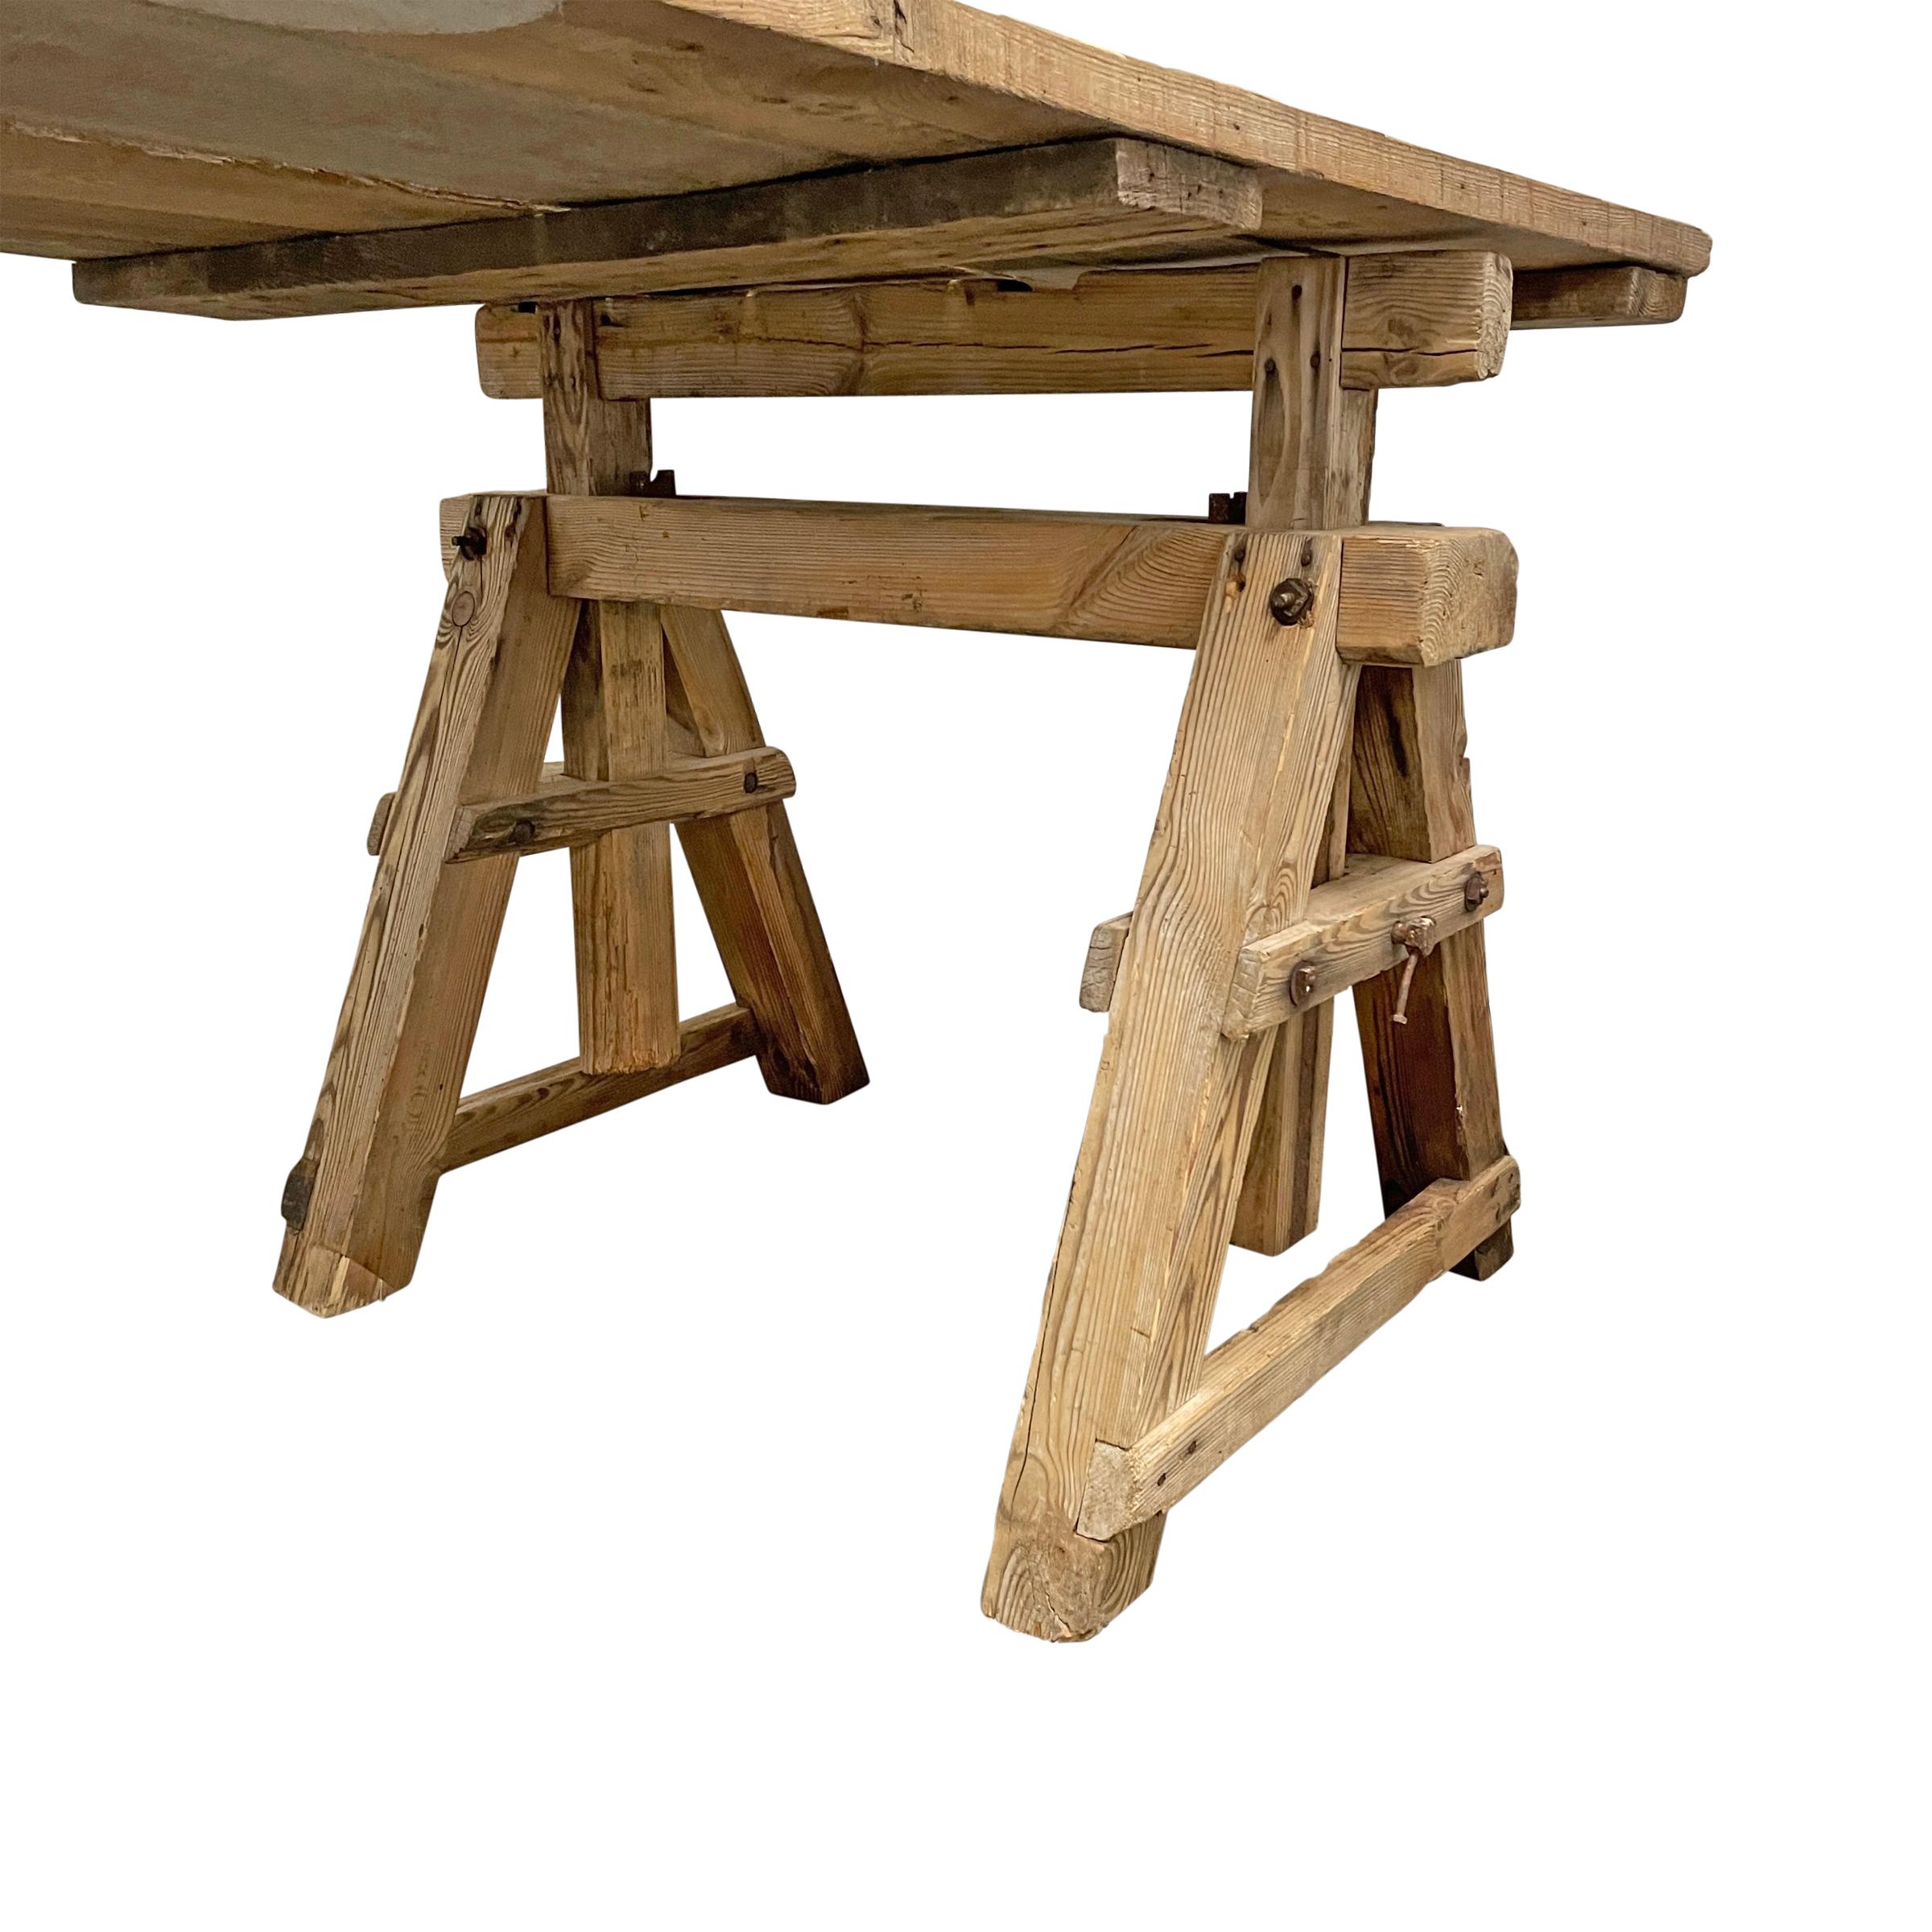 Early 20th Century American Adjustable Work Table 7